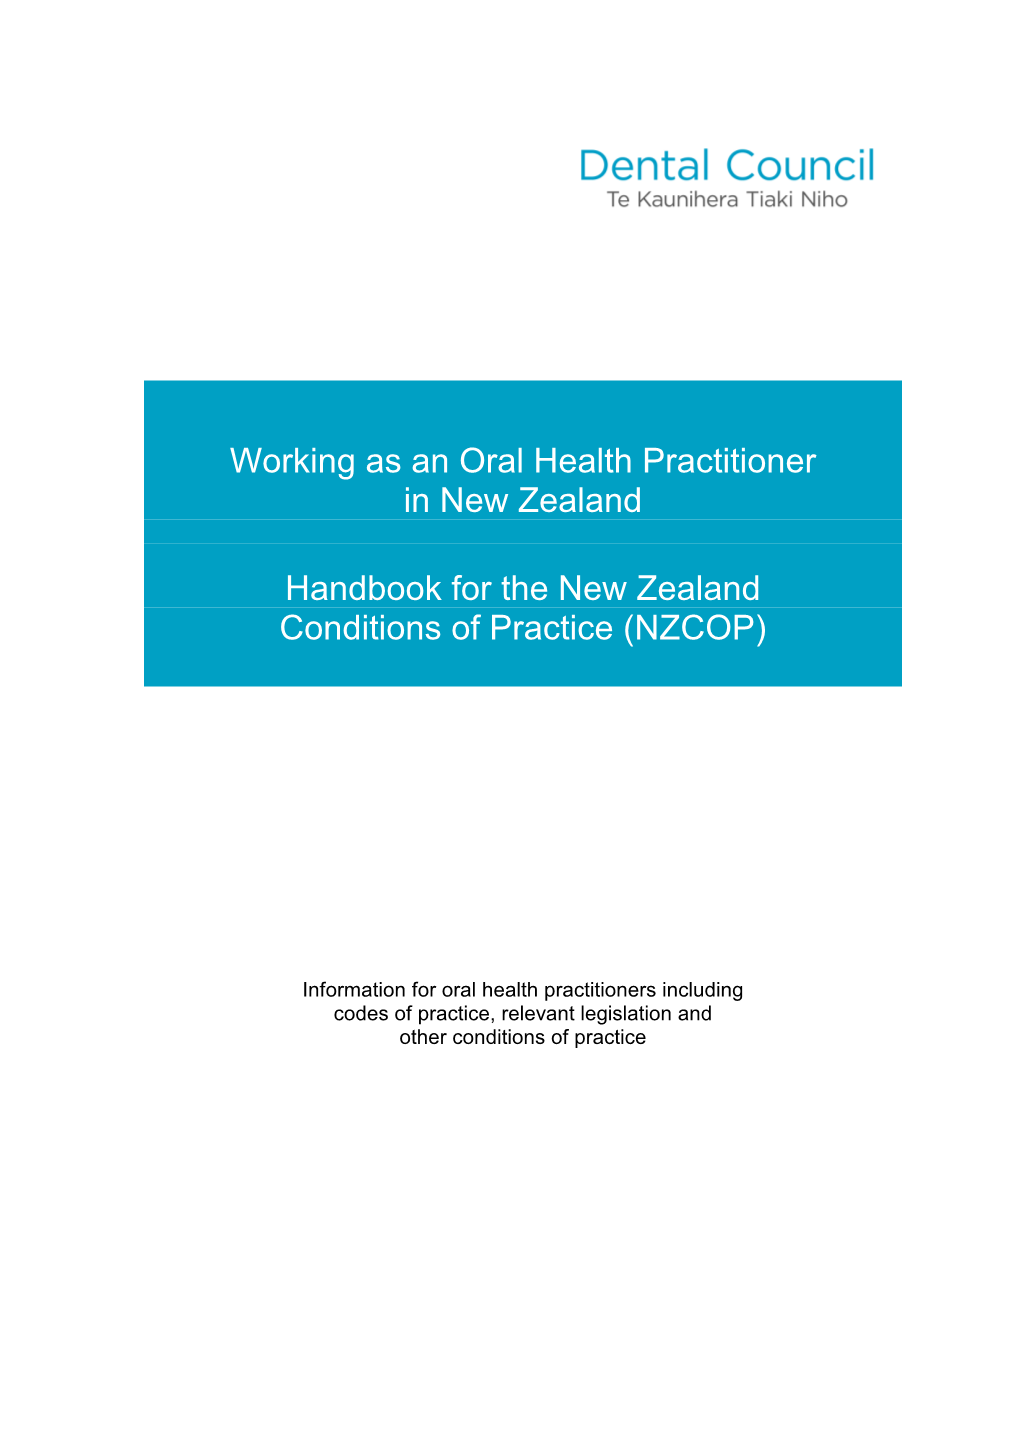 Working As an Oral Health Practitioner in New Zealand Handbook for the New Zealand Conditions of Practice